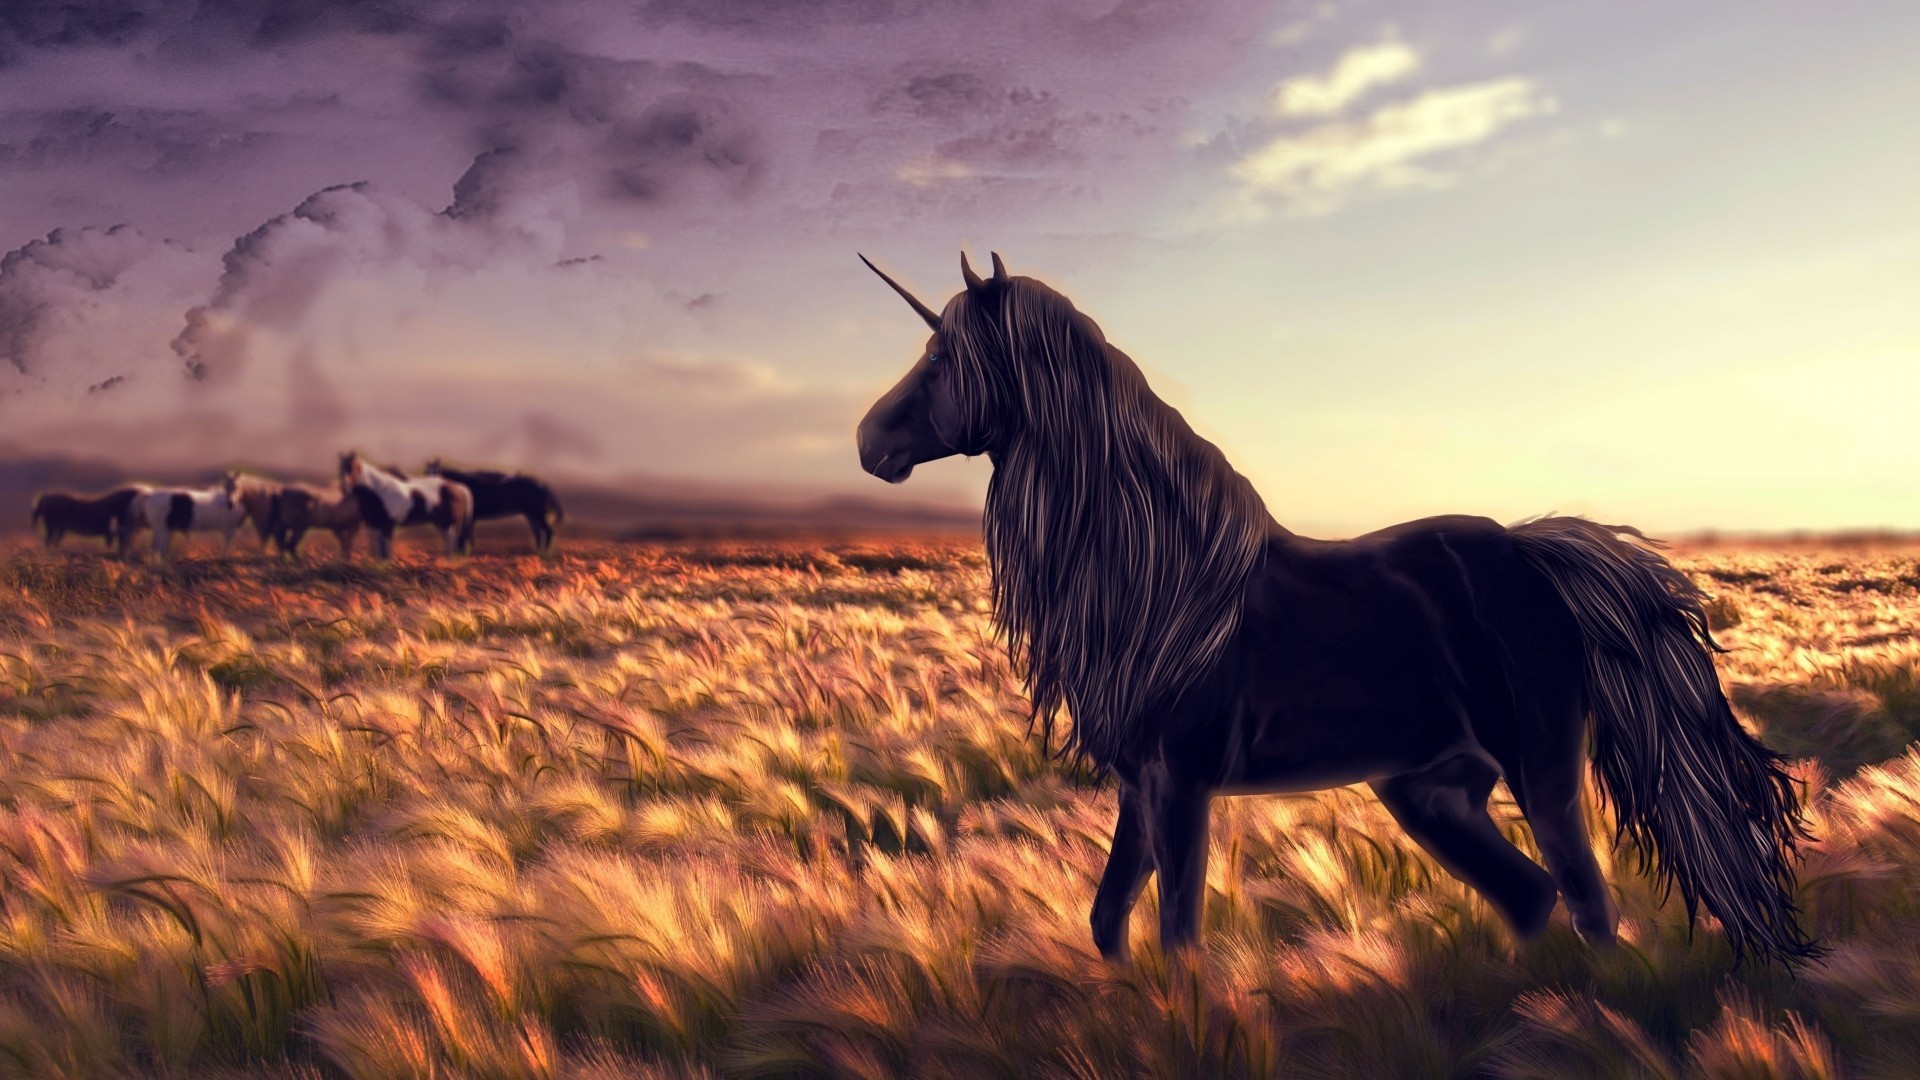 60 Horse Wallpapers In Hd, 1920x1080, 1080p And Many - Unicorn Field - HD Wallpaper 